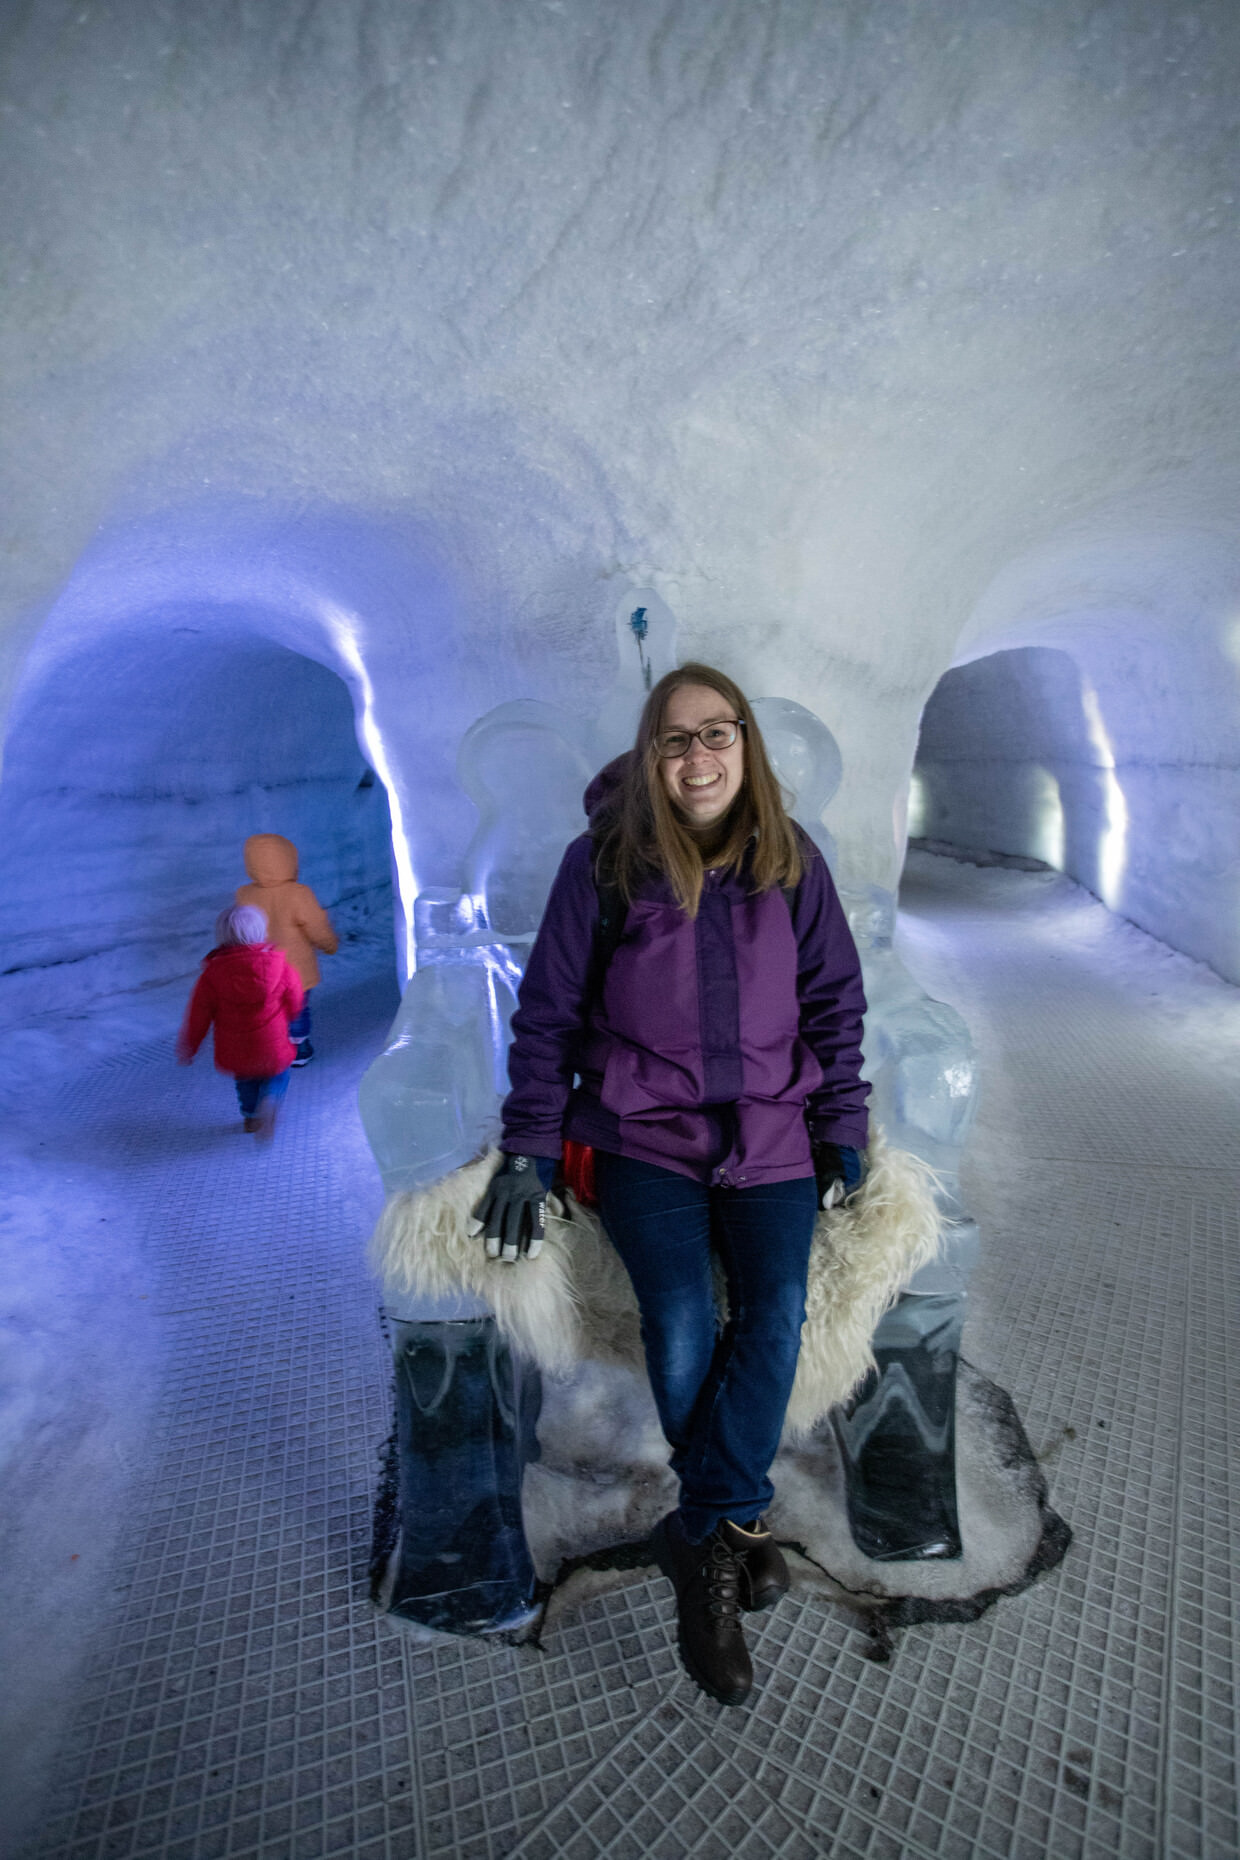 Samantha in the ice cave (while the boys are running away!)